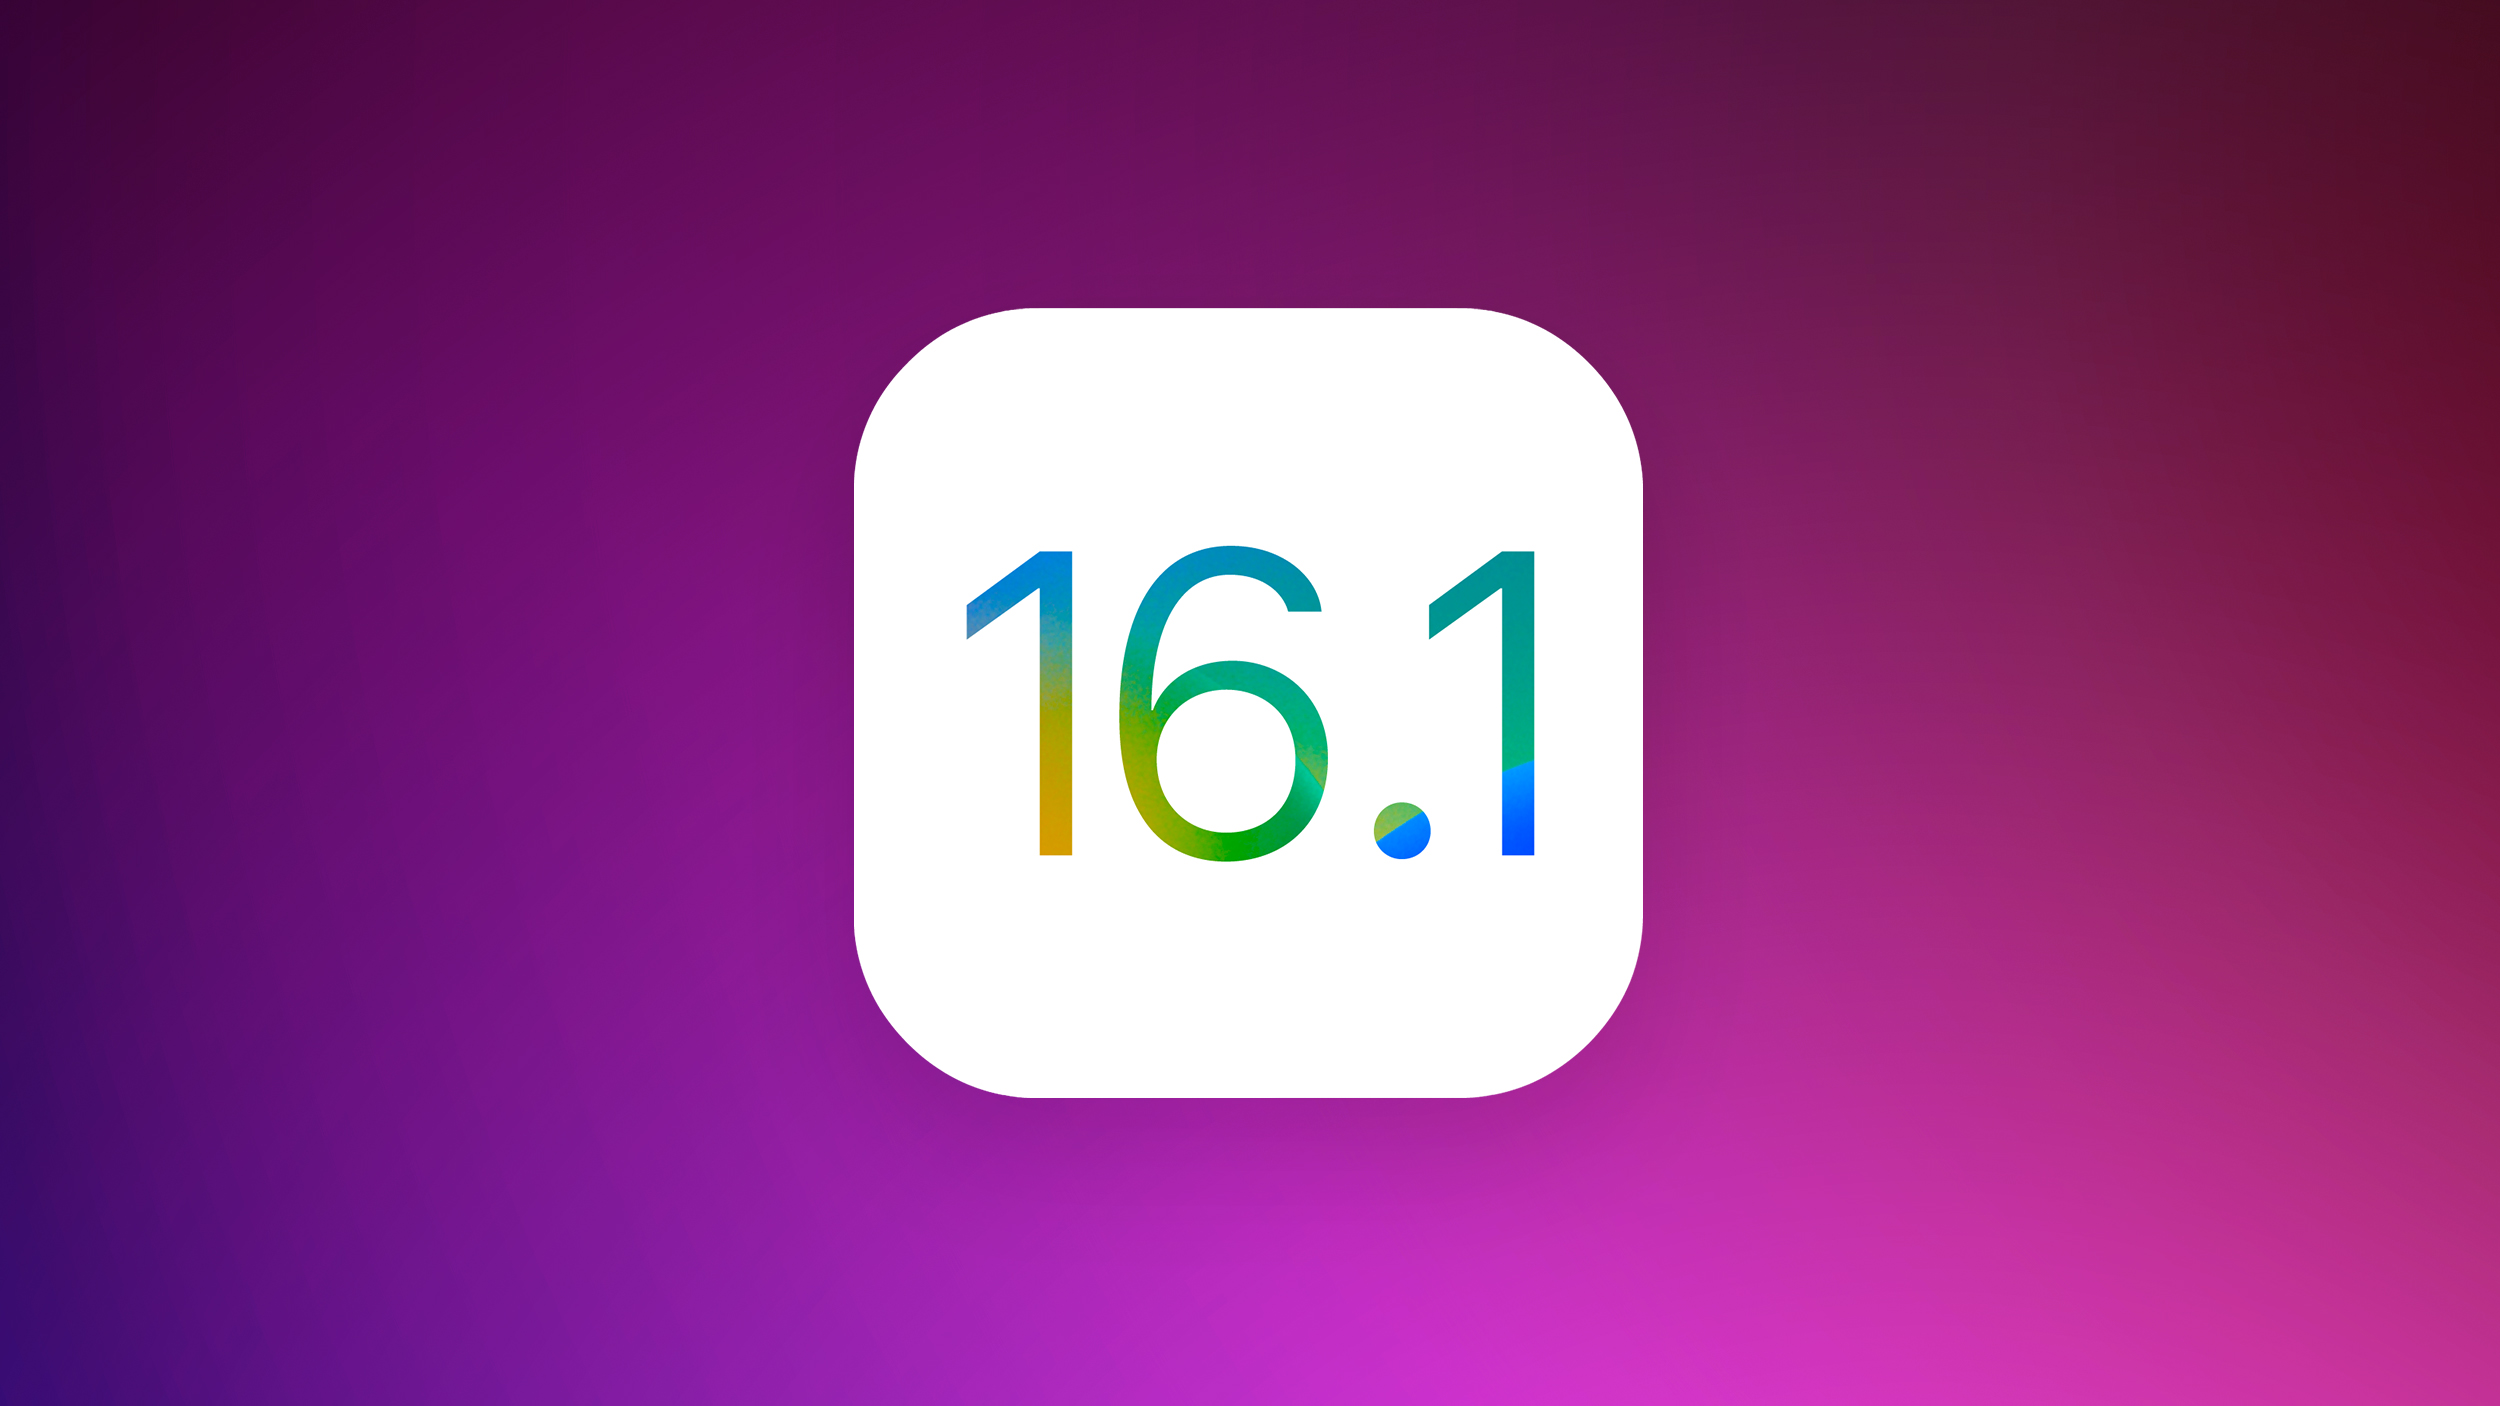 Everything New With iOS 16.1 Beta 2: Lock Screen Charging Indicator, Copy Paste Alert Fix, Battery Status Updates and More